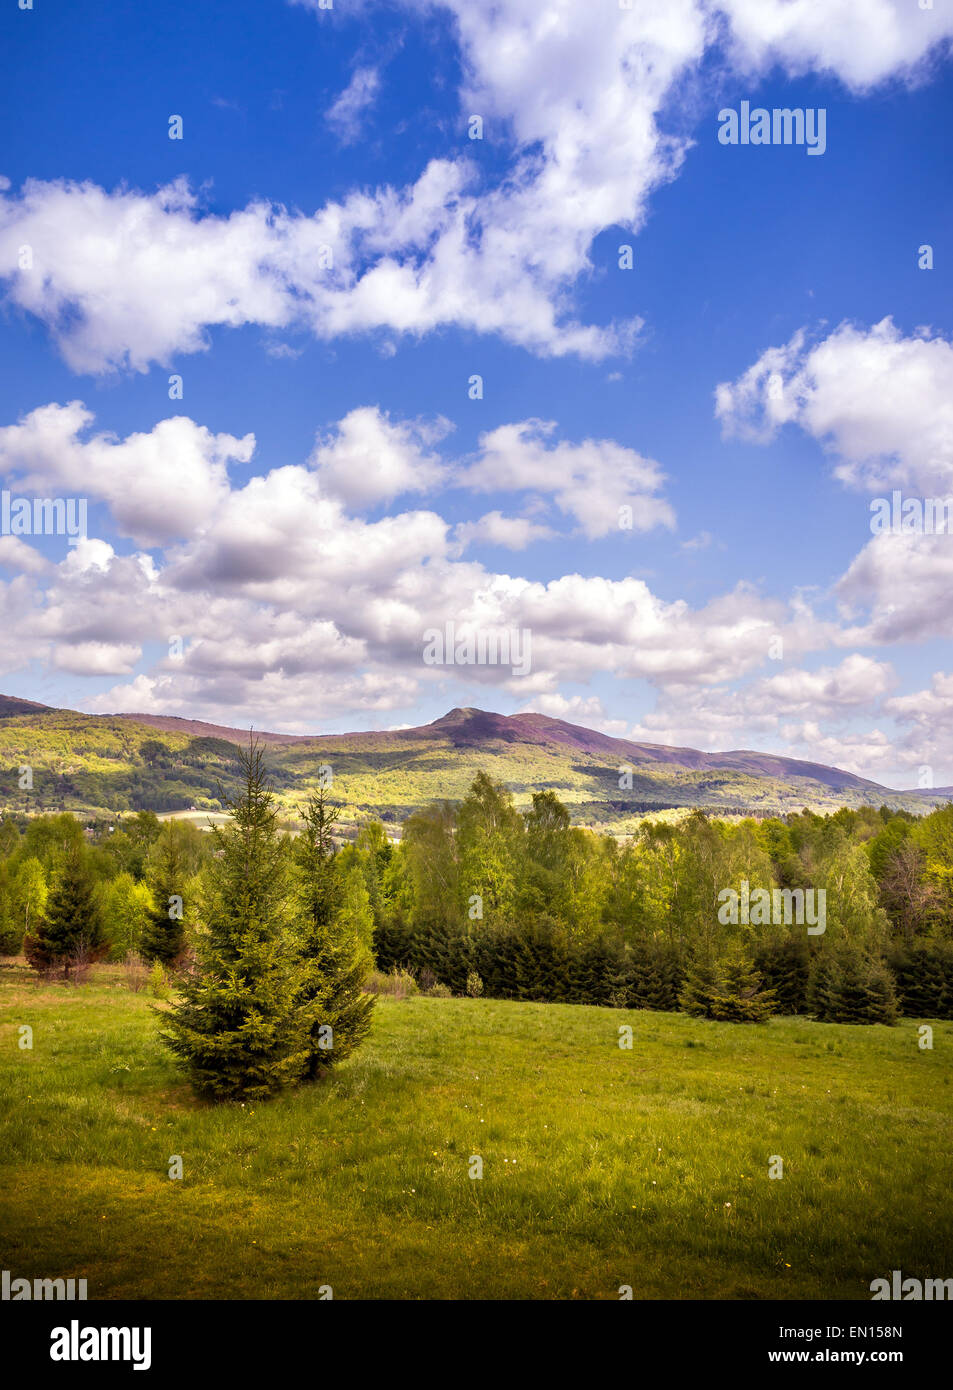 Landscape of mountains and forest in eastern Europe Stock Photo